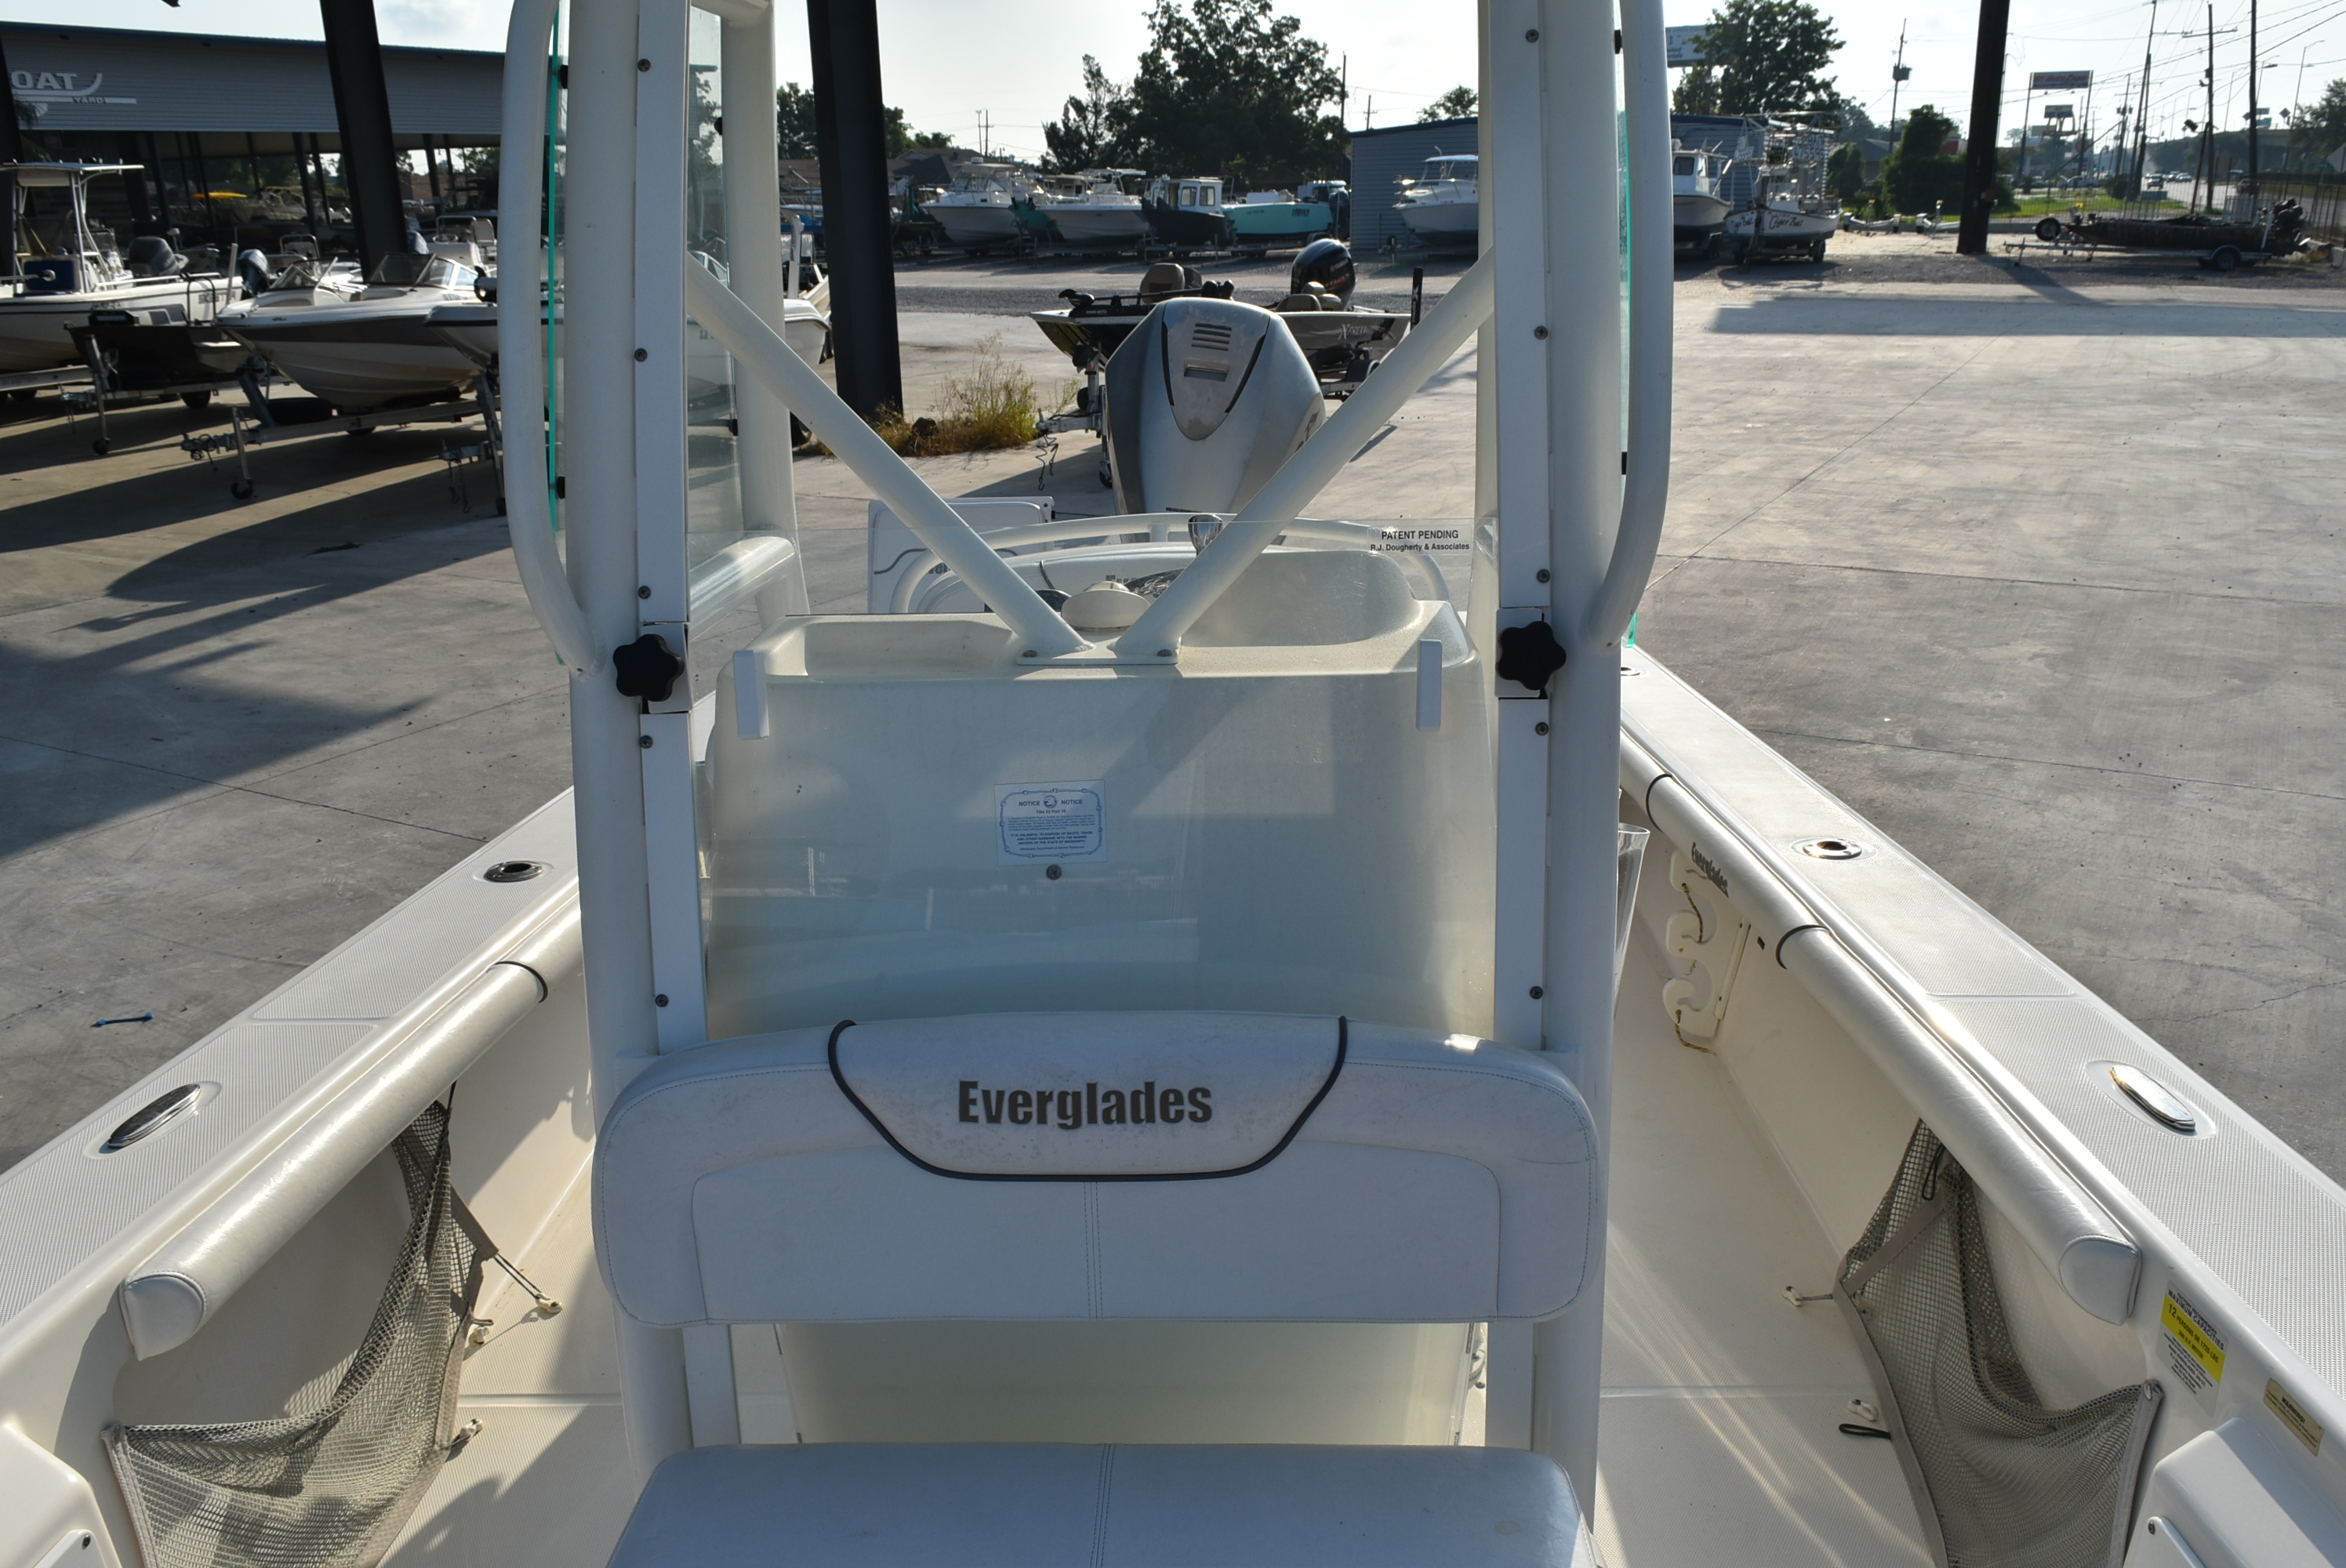 2007 Everglades boat for sale, model of the boat is 243 CC & Image # 14 of 15